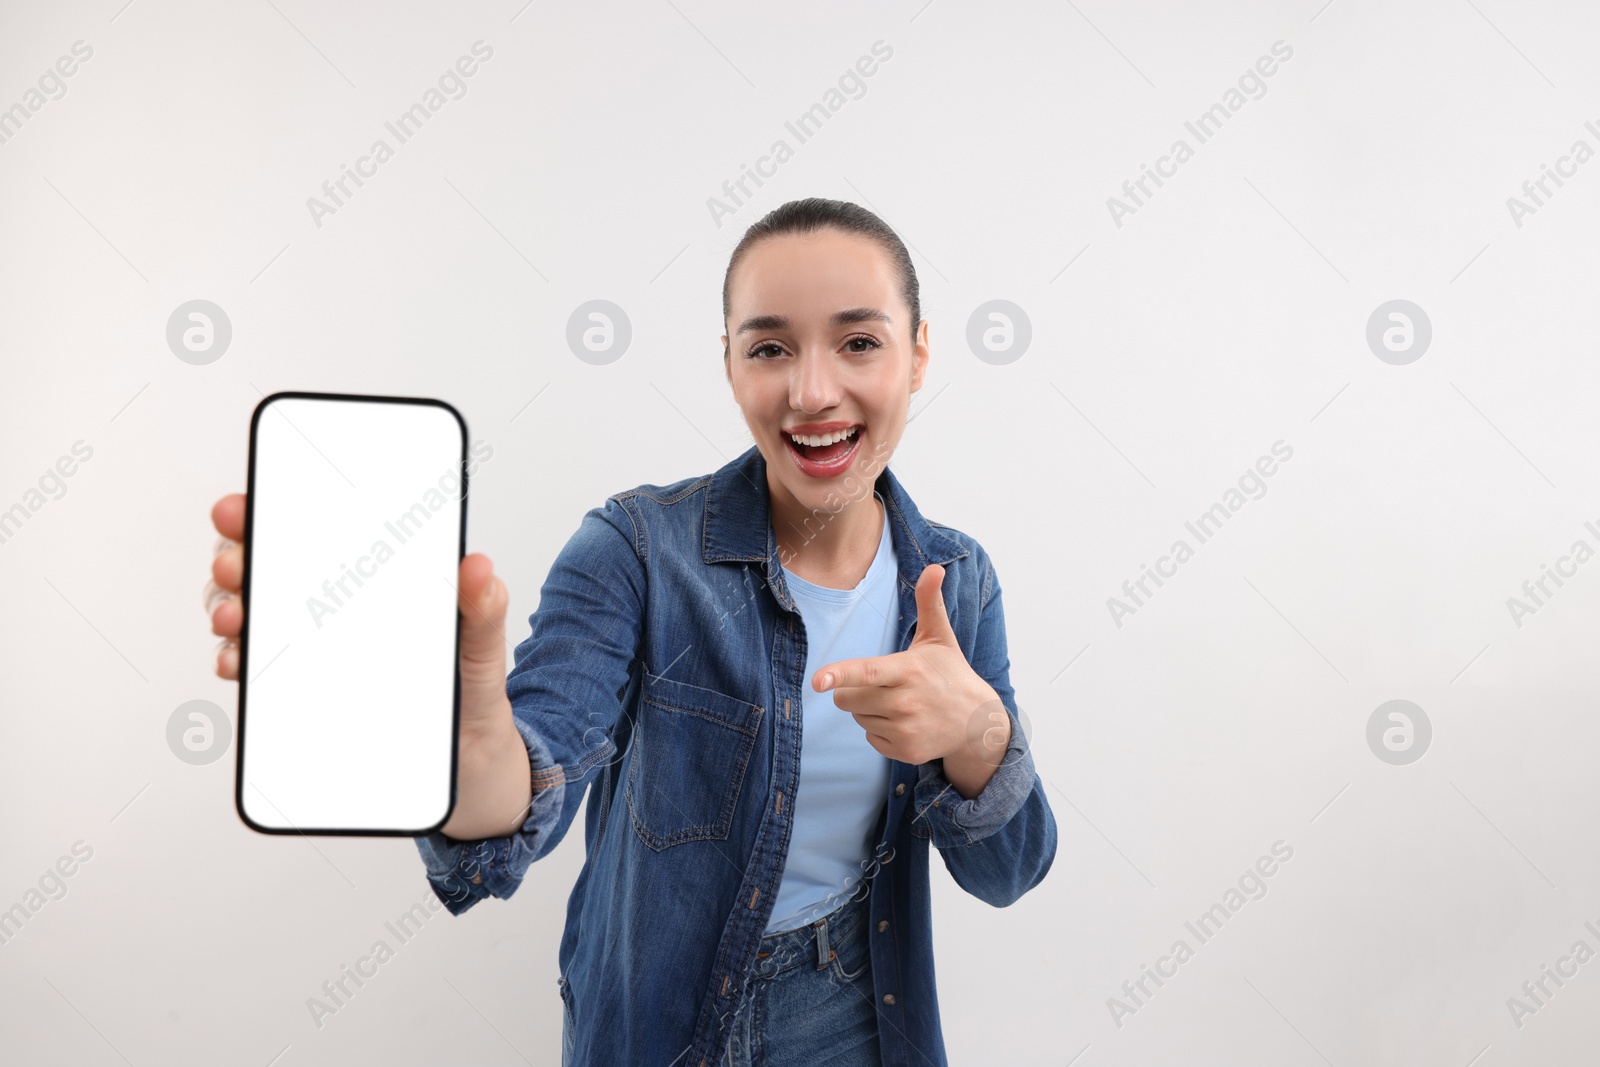 Photo of Young woman showing smartphone in hand and pointing at it on white background